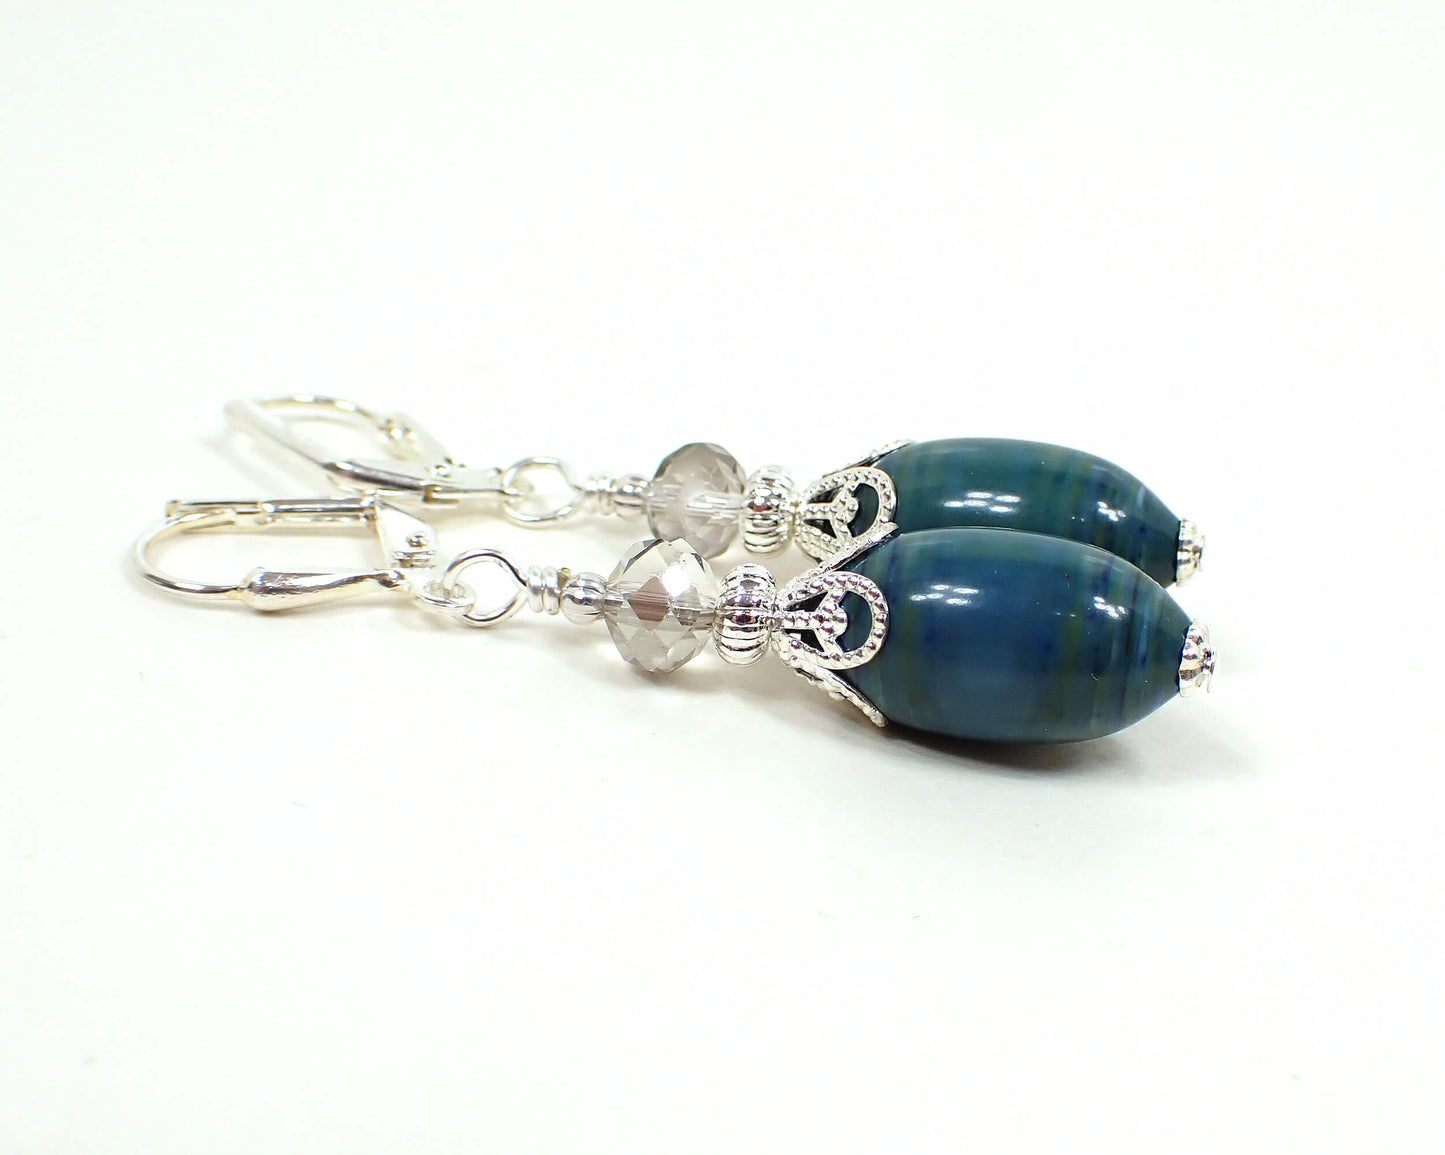 Blue Green Oval Lucite Handmade Drop Earrings Silver Plated Hook Lever Back or Clip On